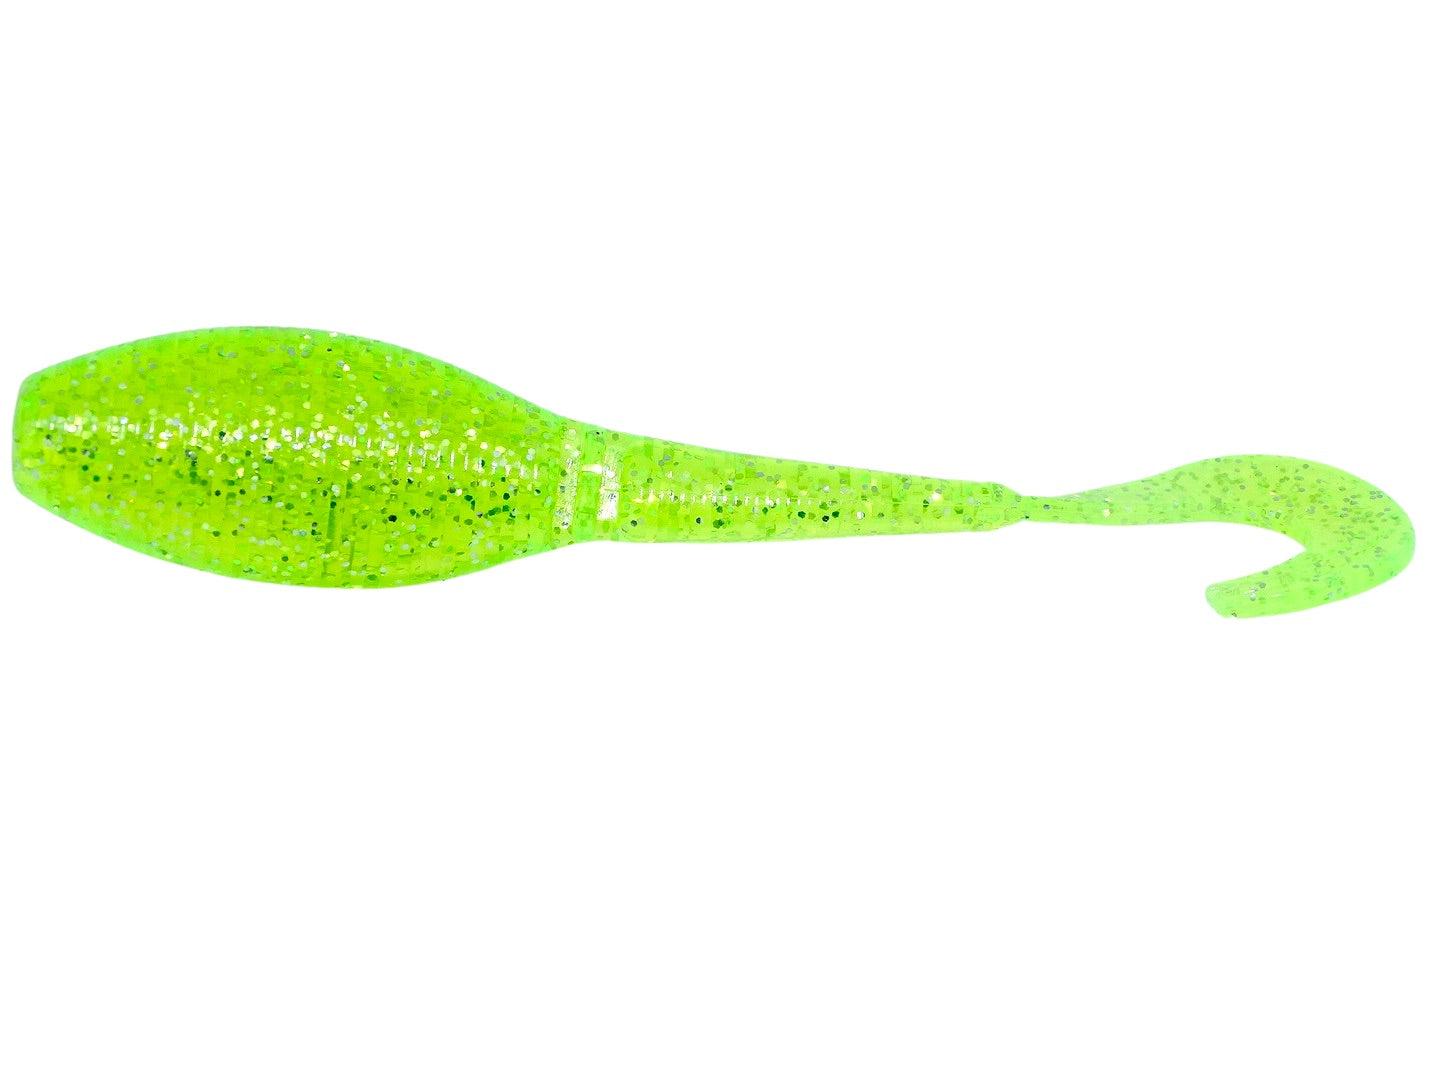 NEW!!! Whippin Chicken, Smokin Hot-Chartreuse Shine, 4 inches, qty 6